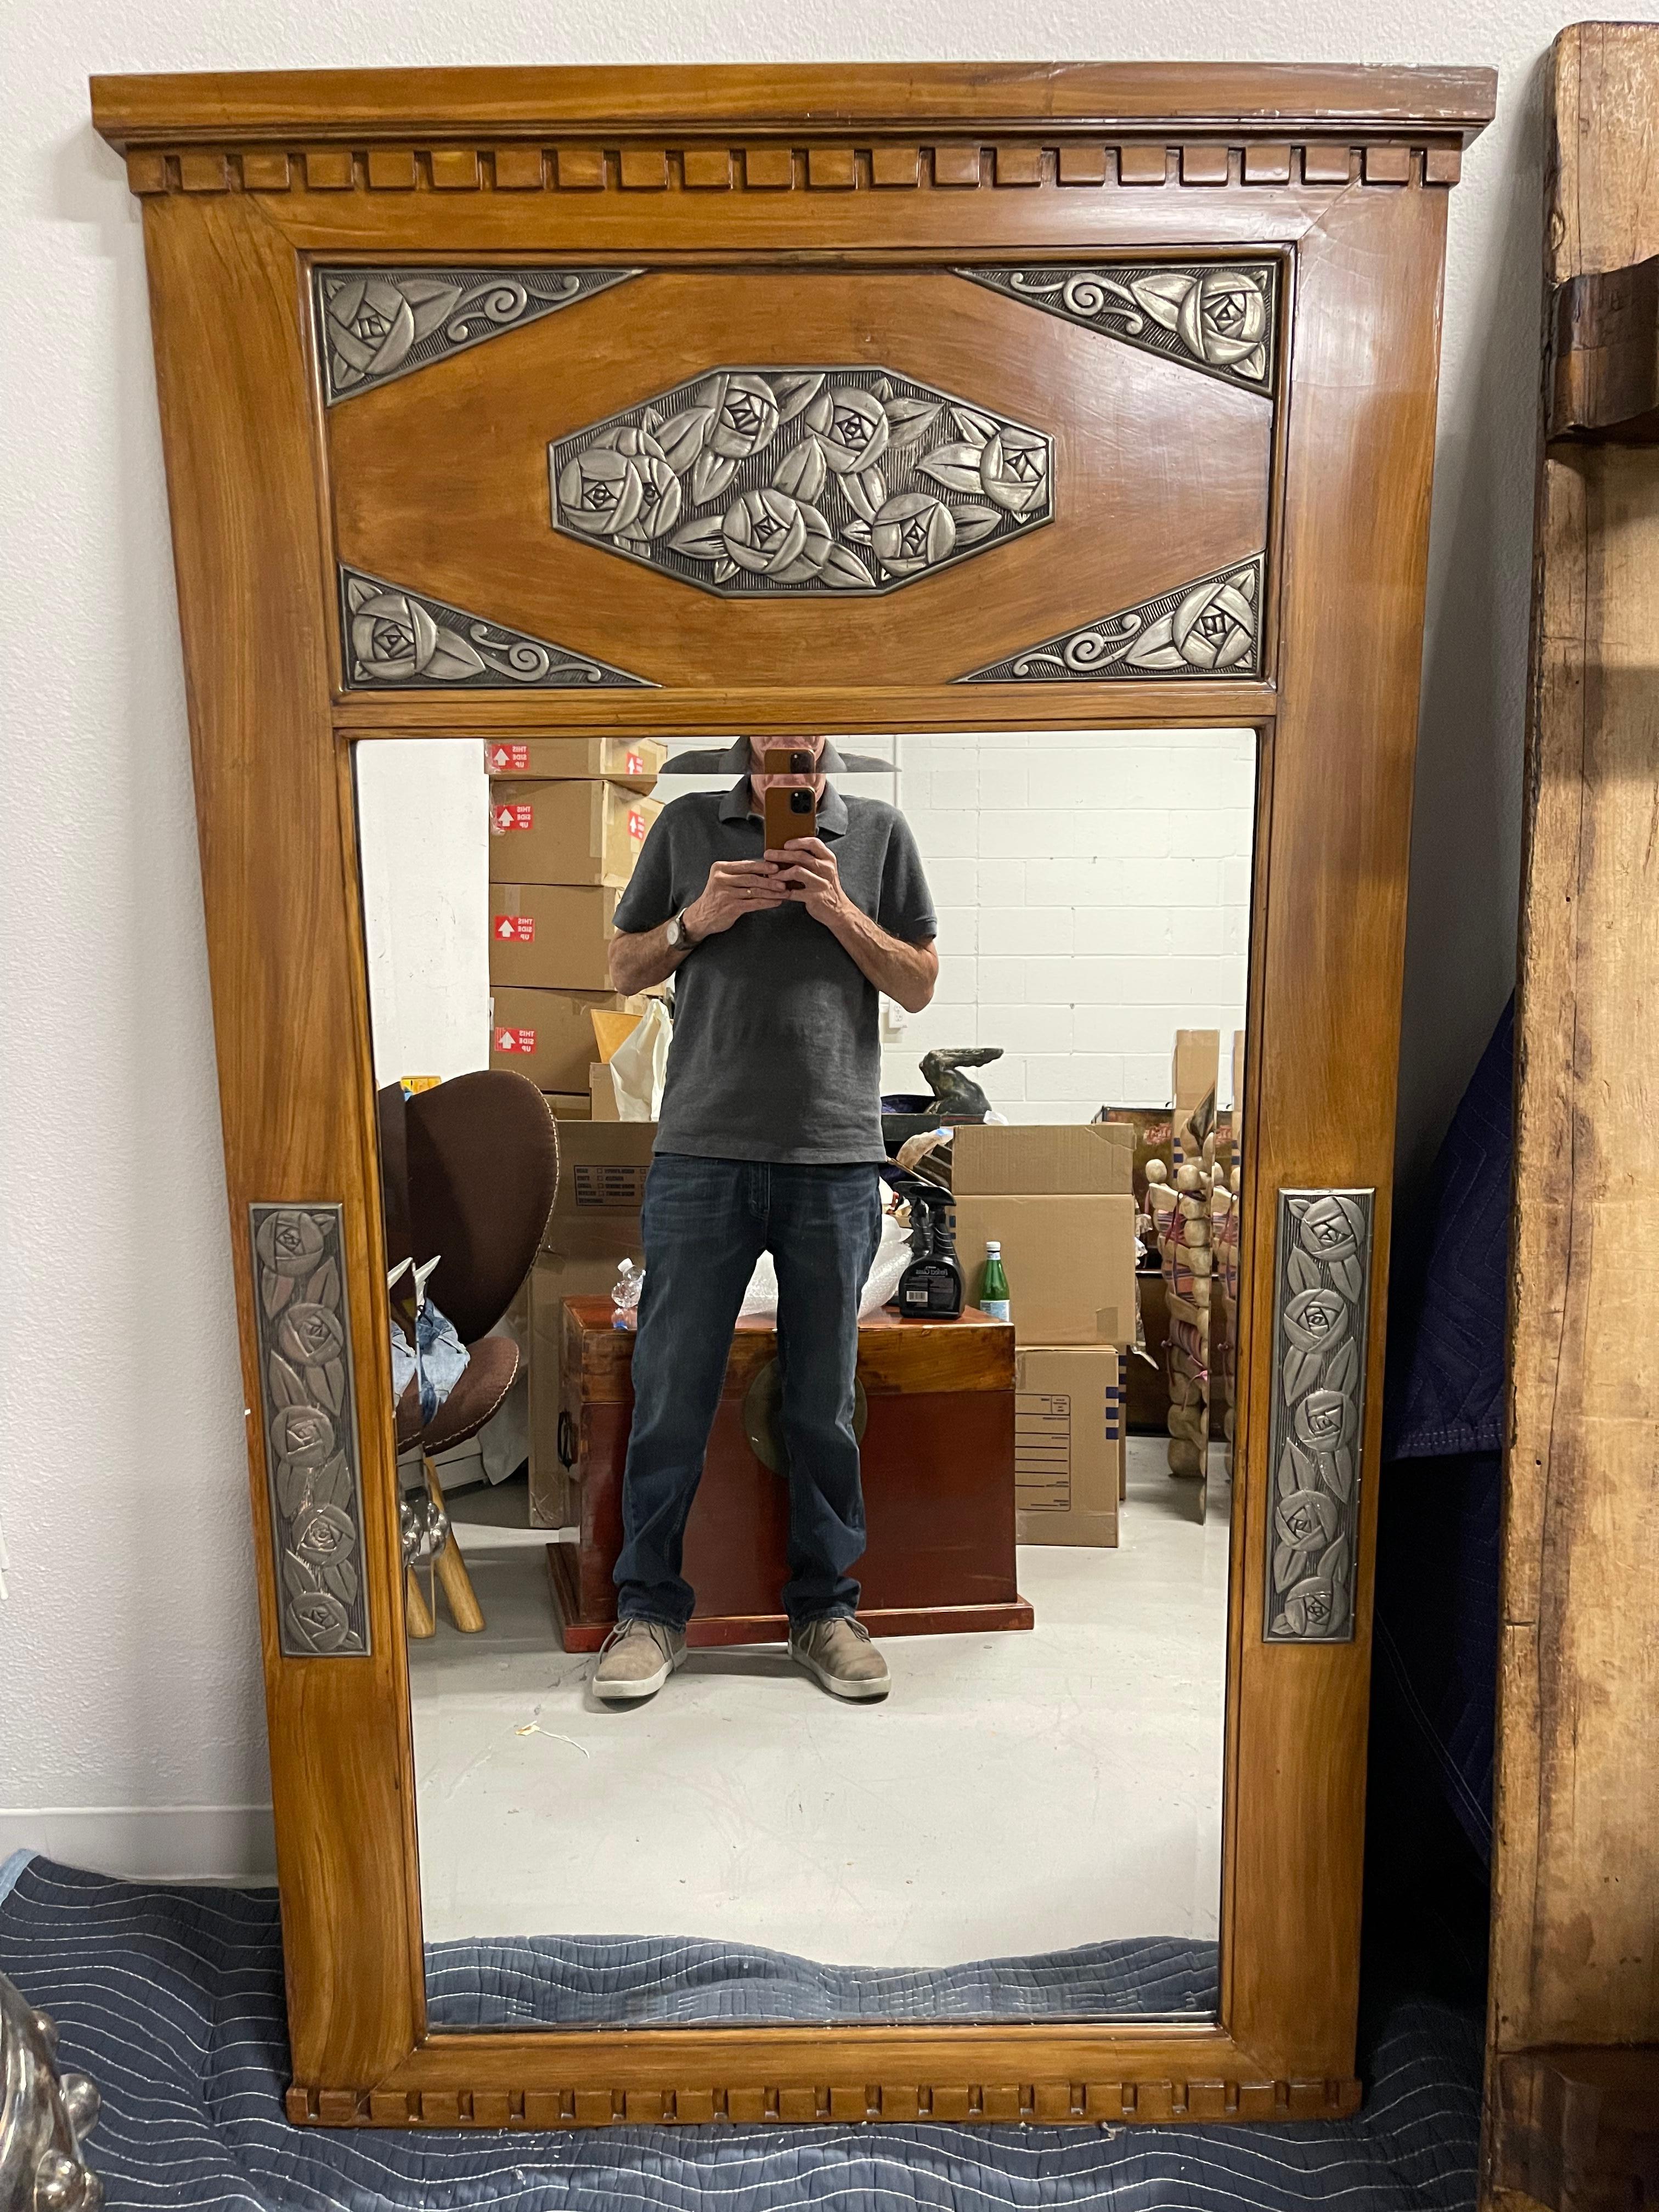 A pretty Art Deco Mirror in the style of Sue Et Mare. This was in the great room of an elegant Palm Springs estate. The mirror is period Art Deco. Please see the detailed photos of the back and it’s age. The mirro has likely been refinished, and is